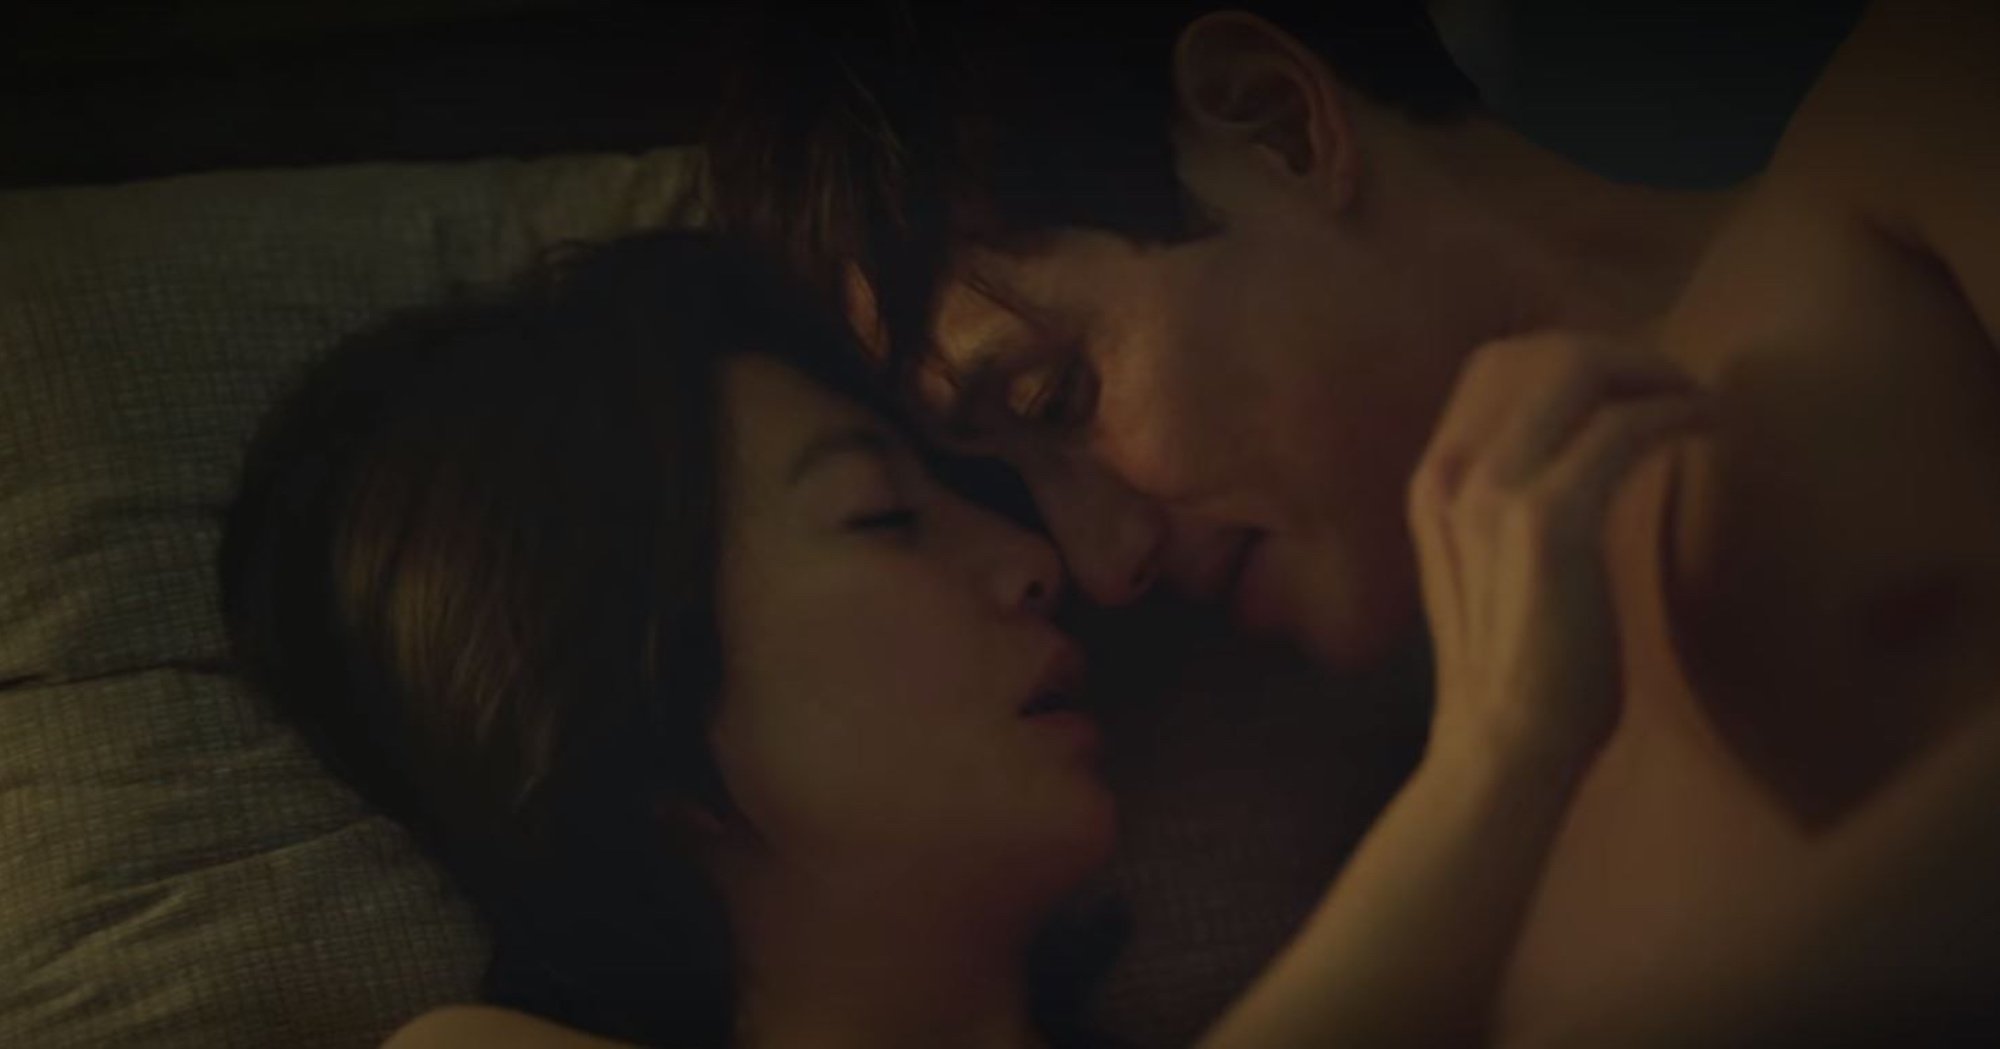 Character Ji Sun-woo and husband in 'The World of the Married' K-drama sex scene kissing in bed.